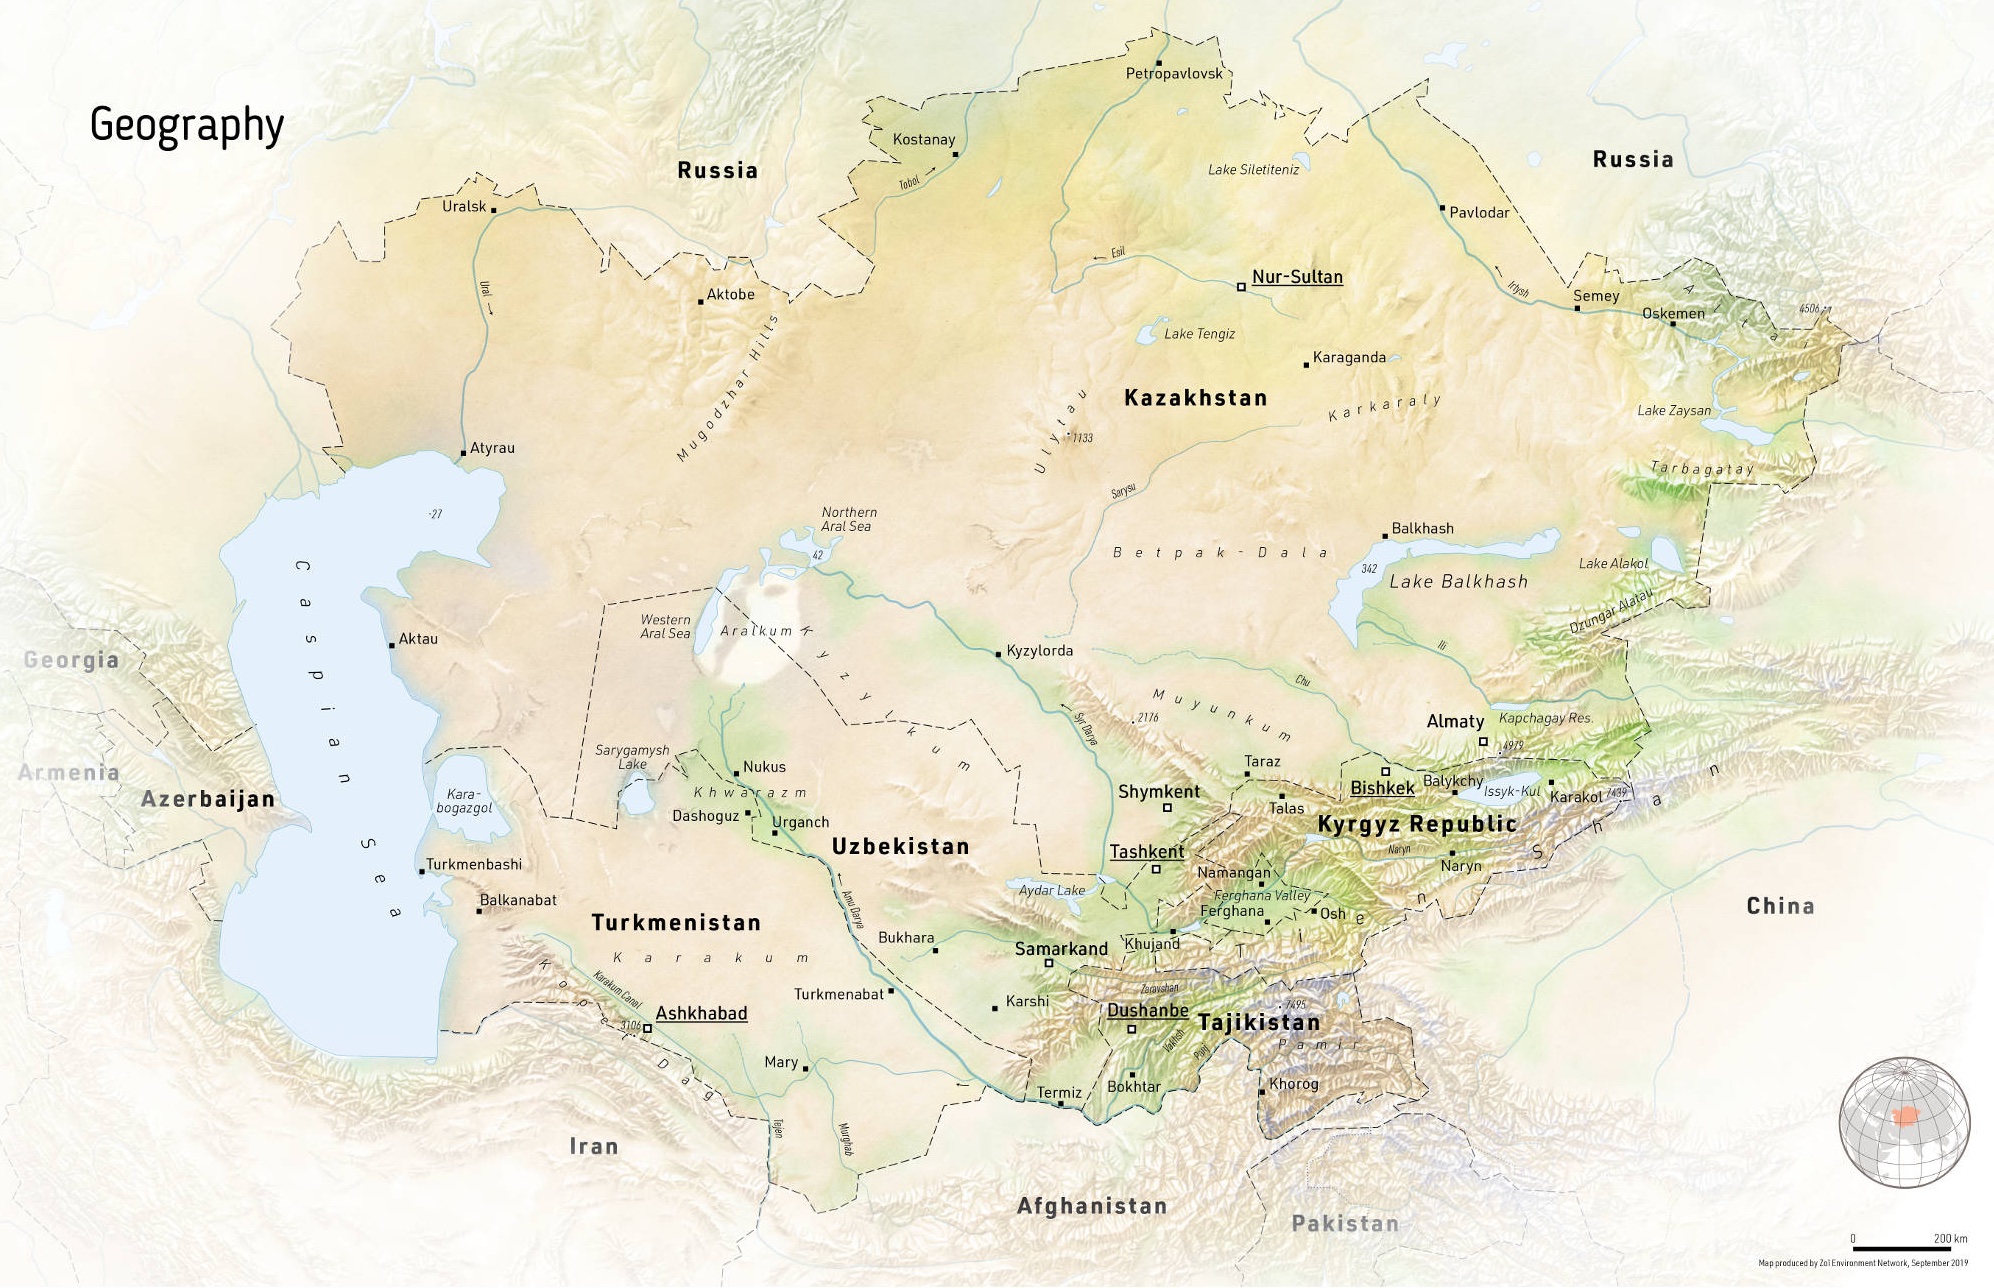 Geography of the Central Asia Region. Source: Zoï Environment Network.